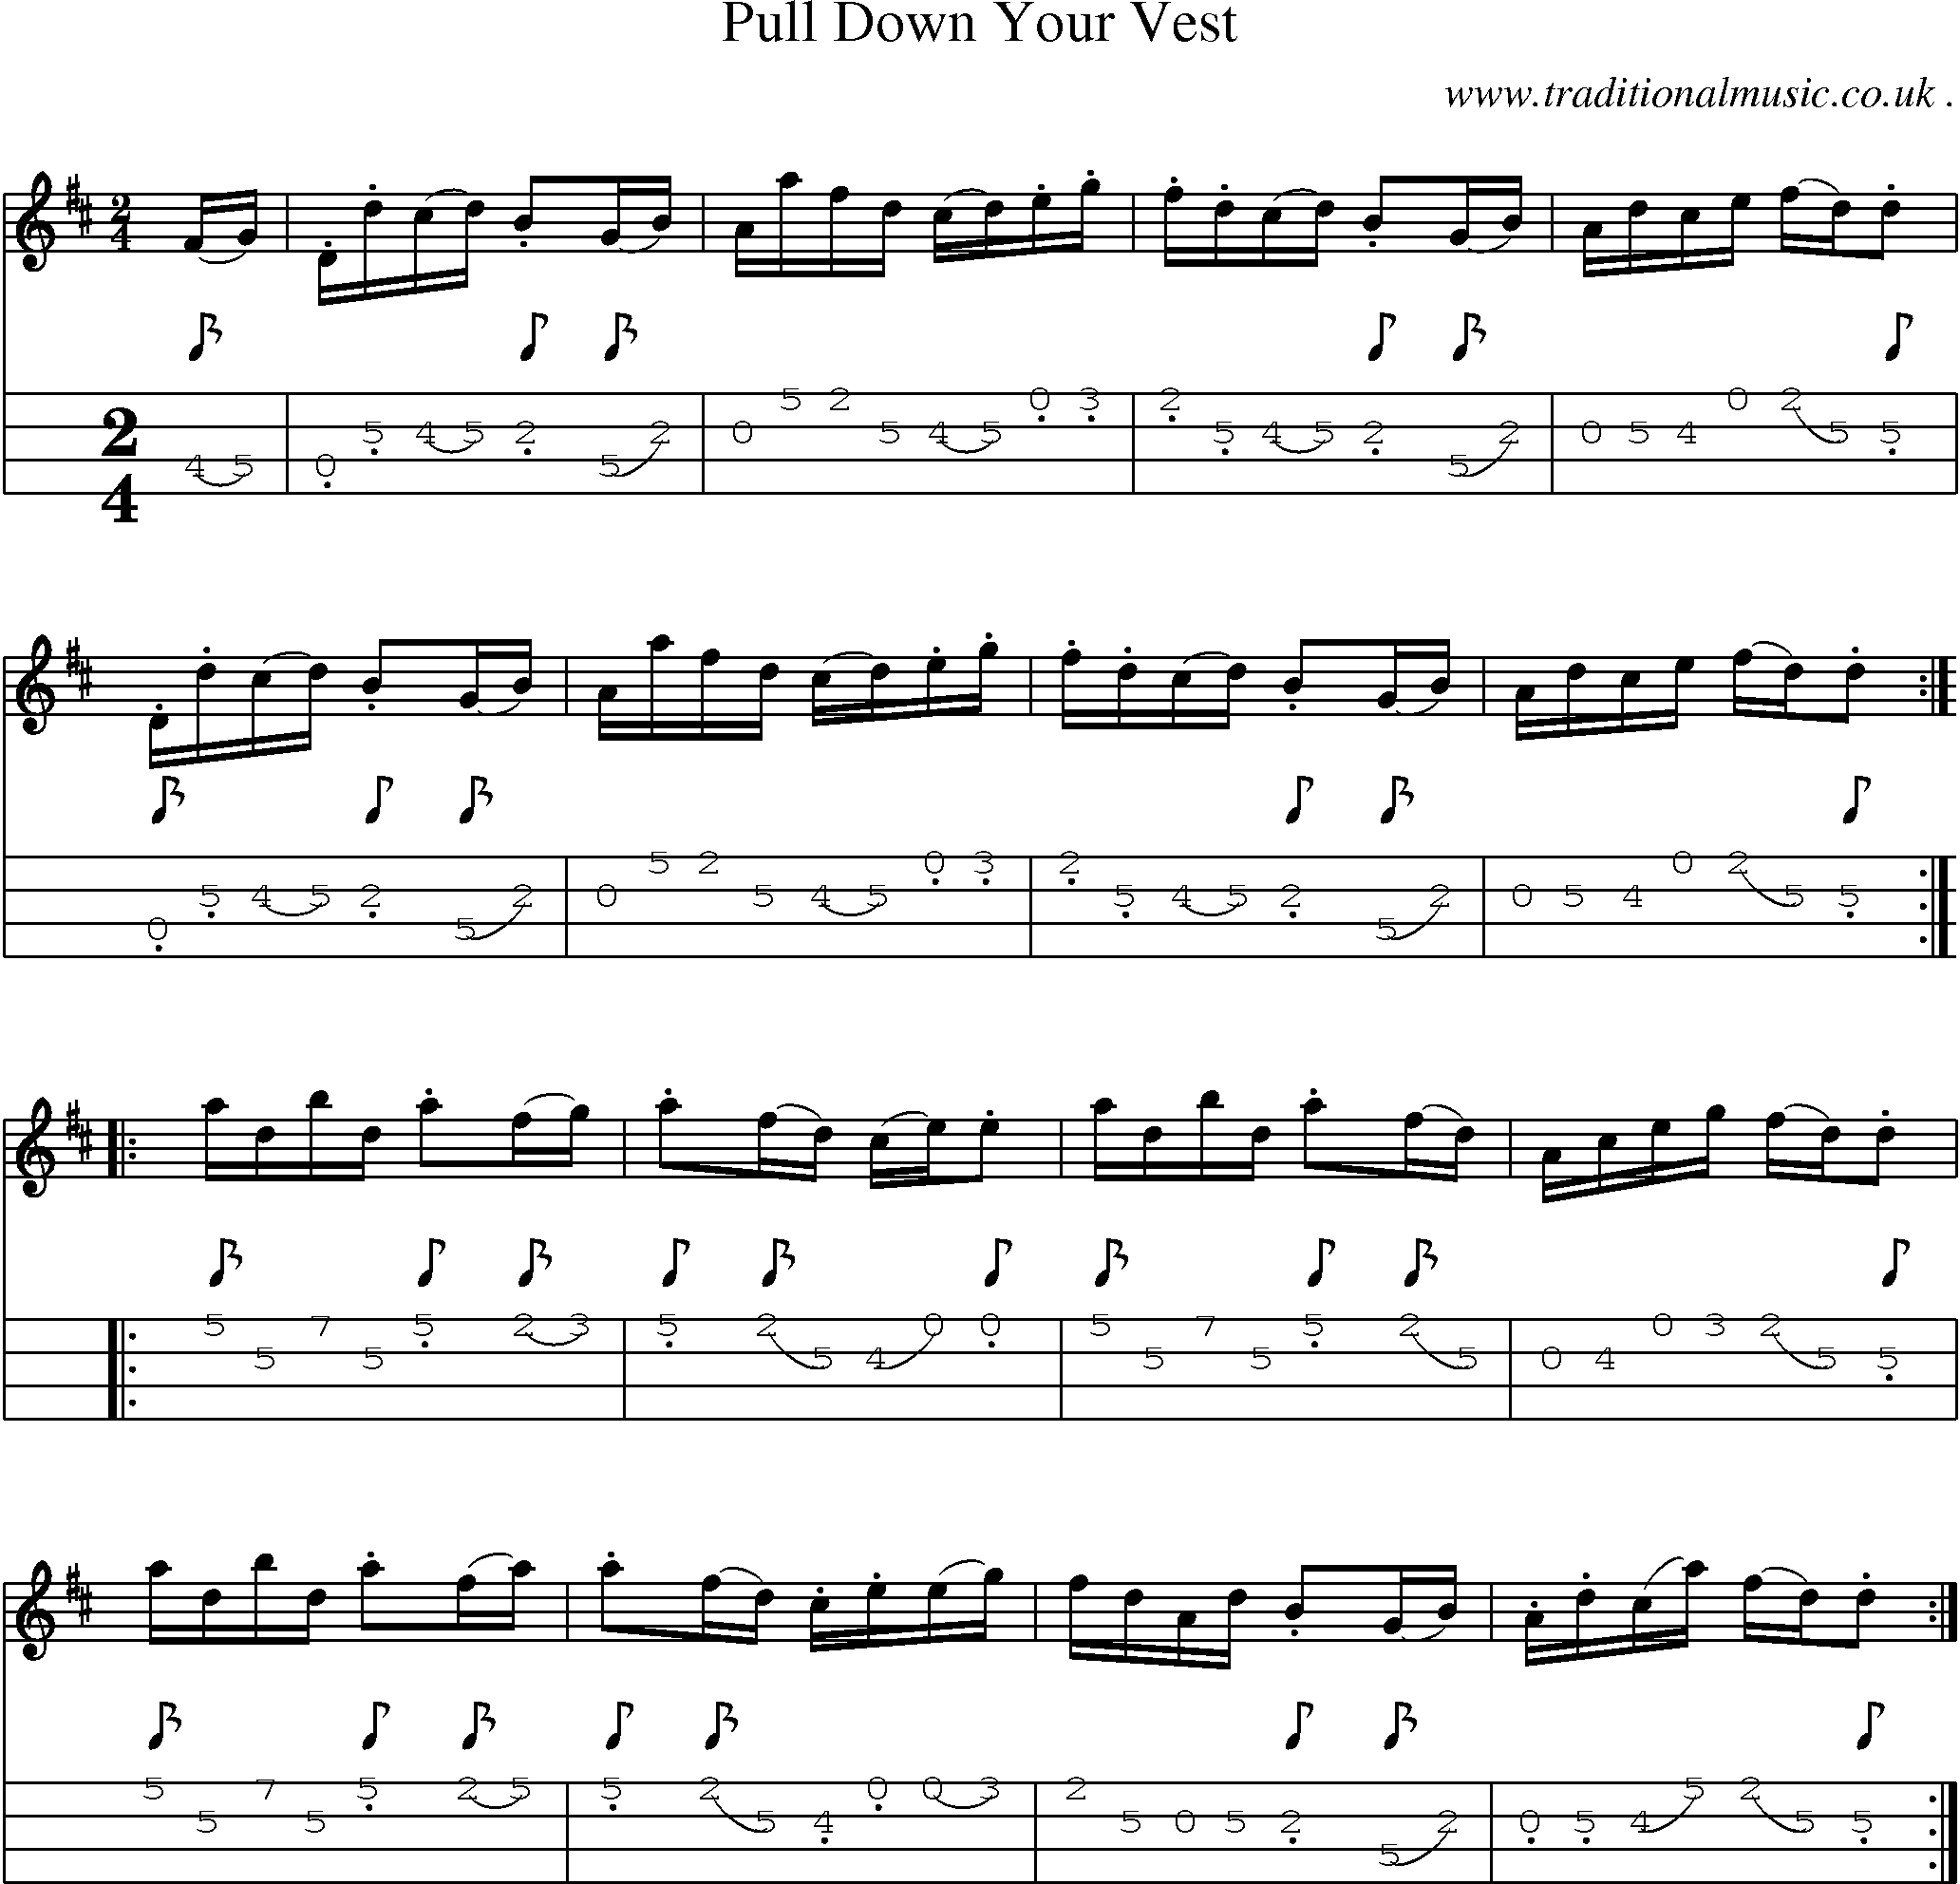 Sheet-Music and Mandolin Tabs for Pull Down Your Vest